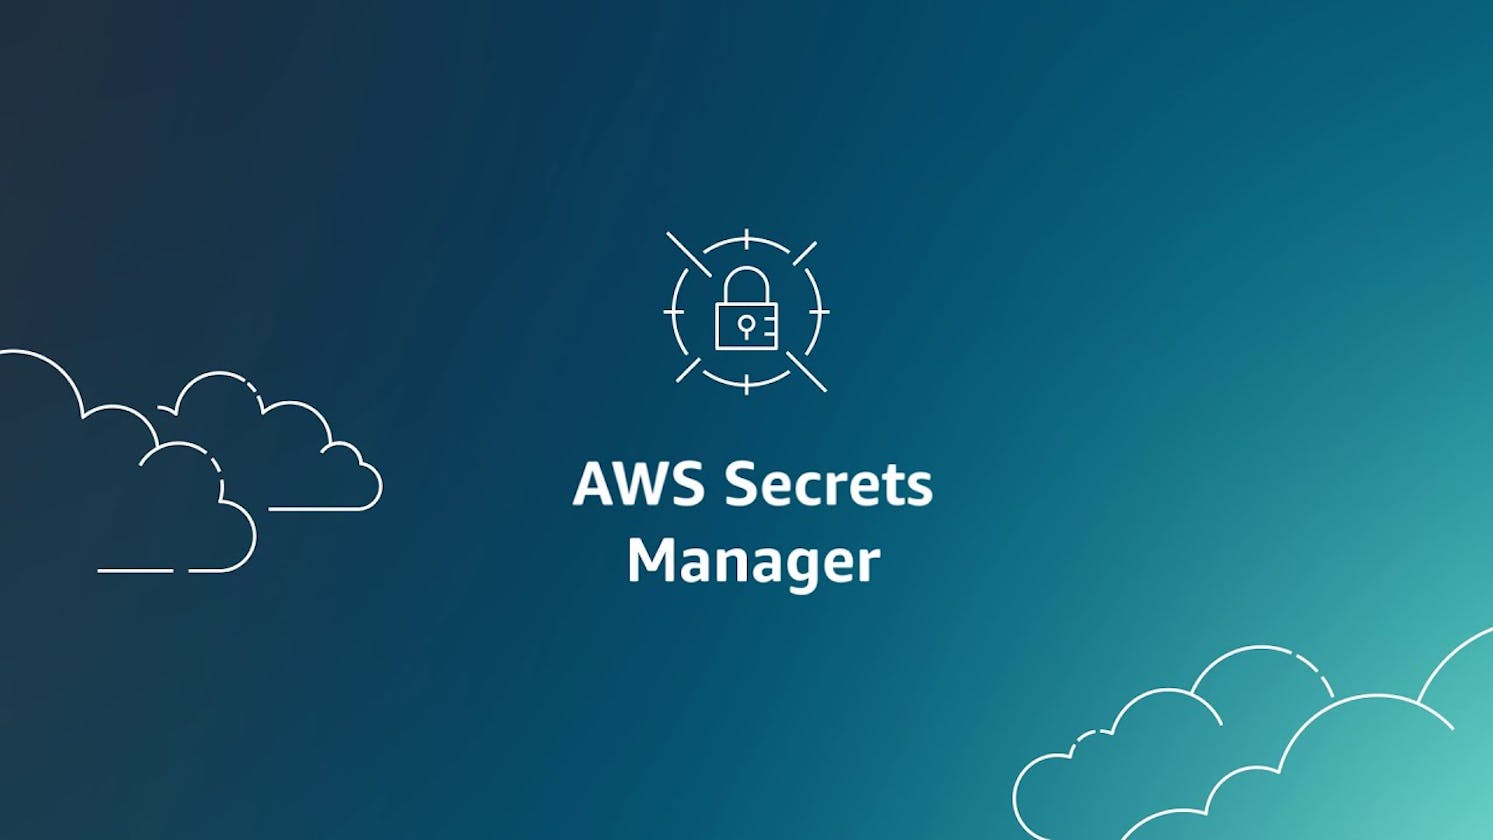 Securing and Rotating Secrets Easily with AWS Secrets Manager (Part 2 of 2)